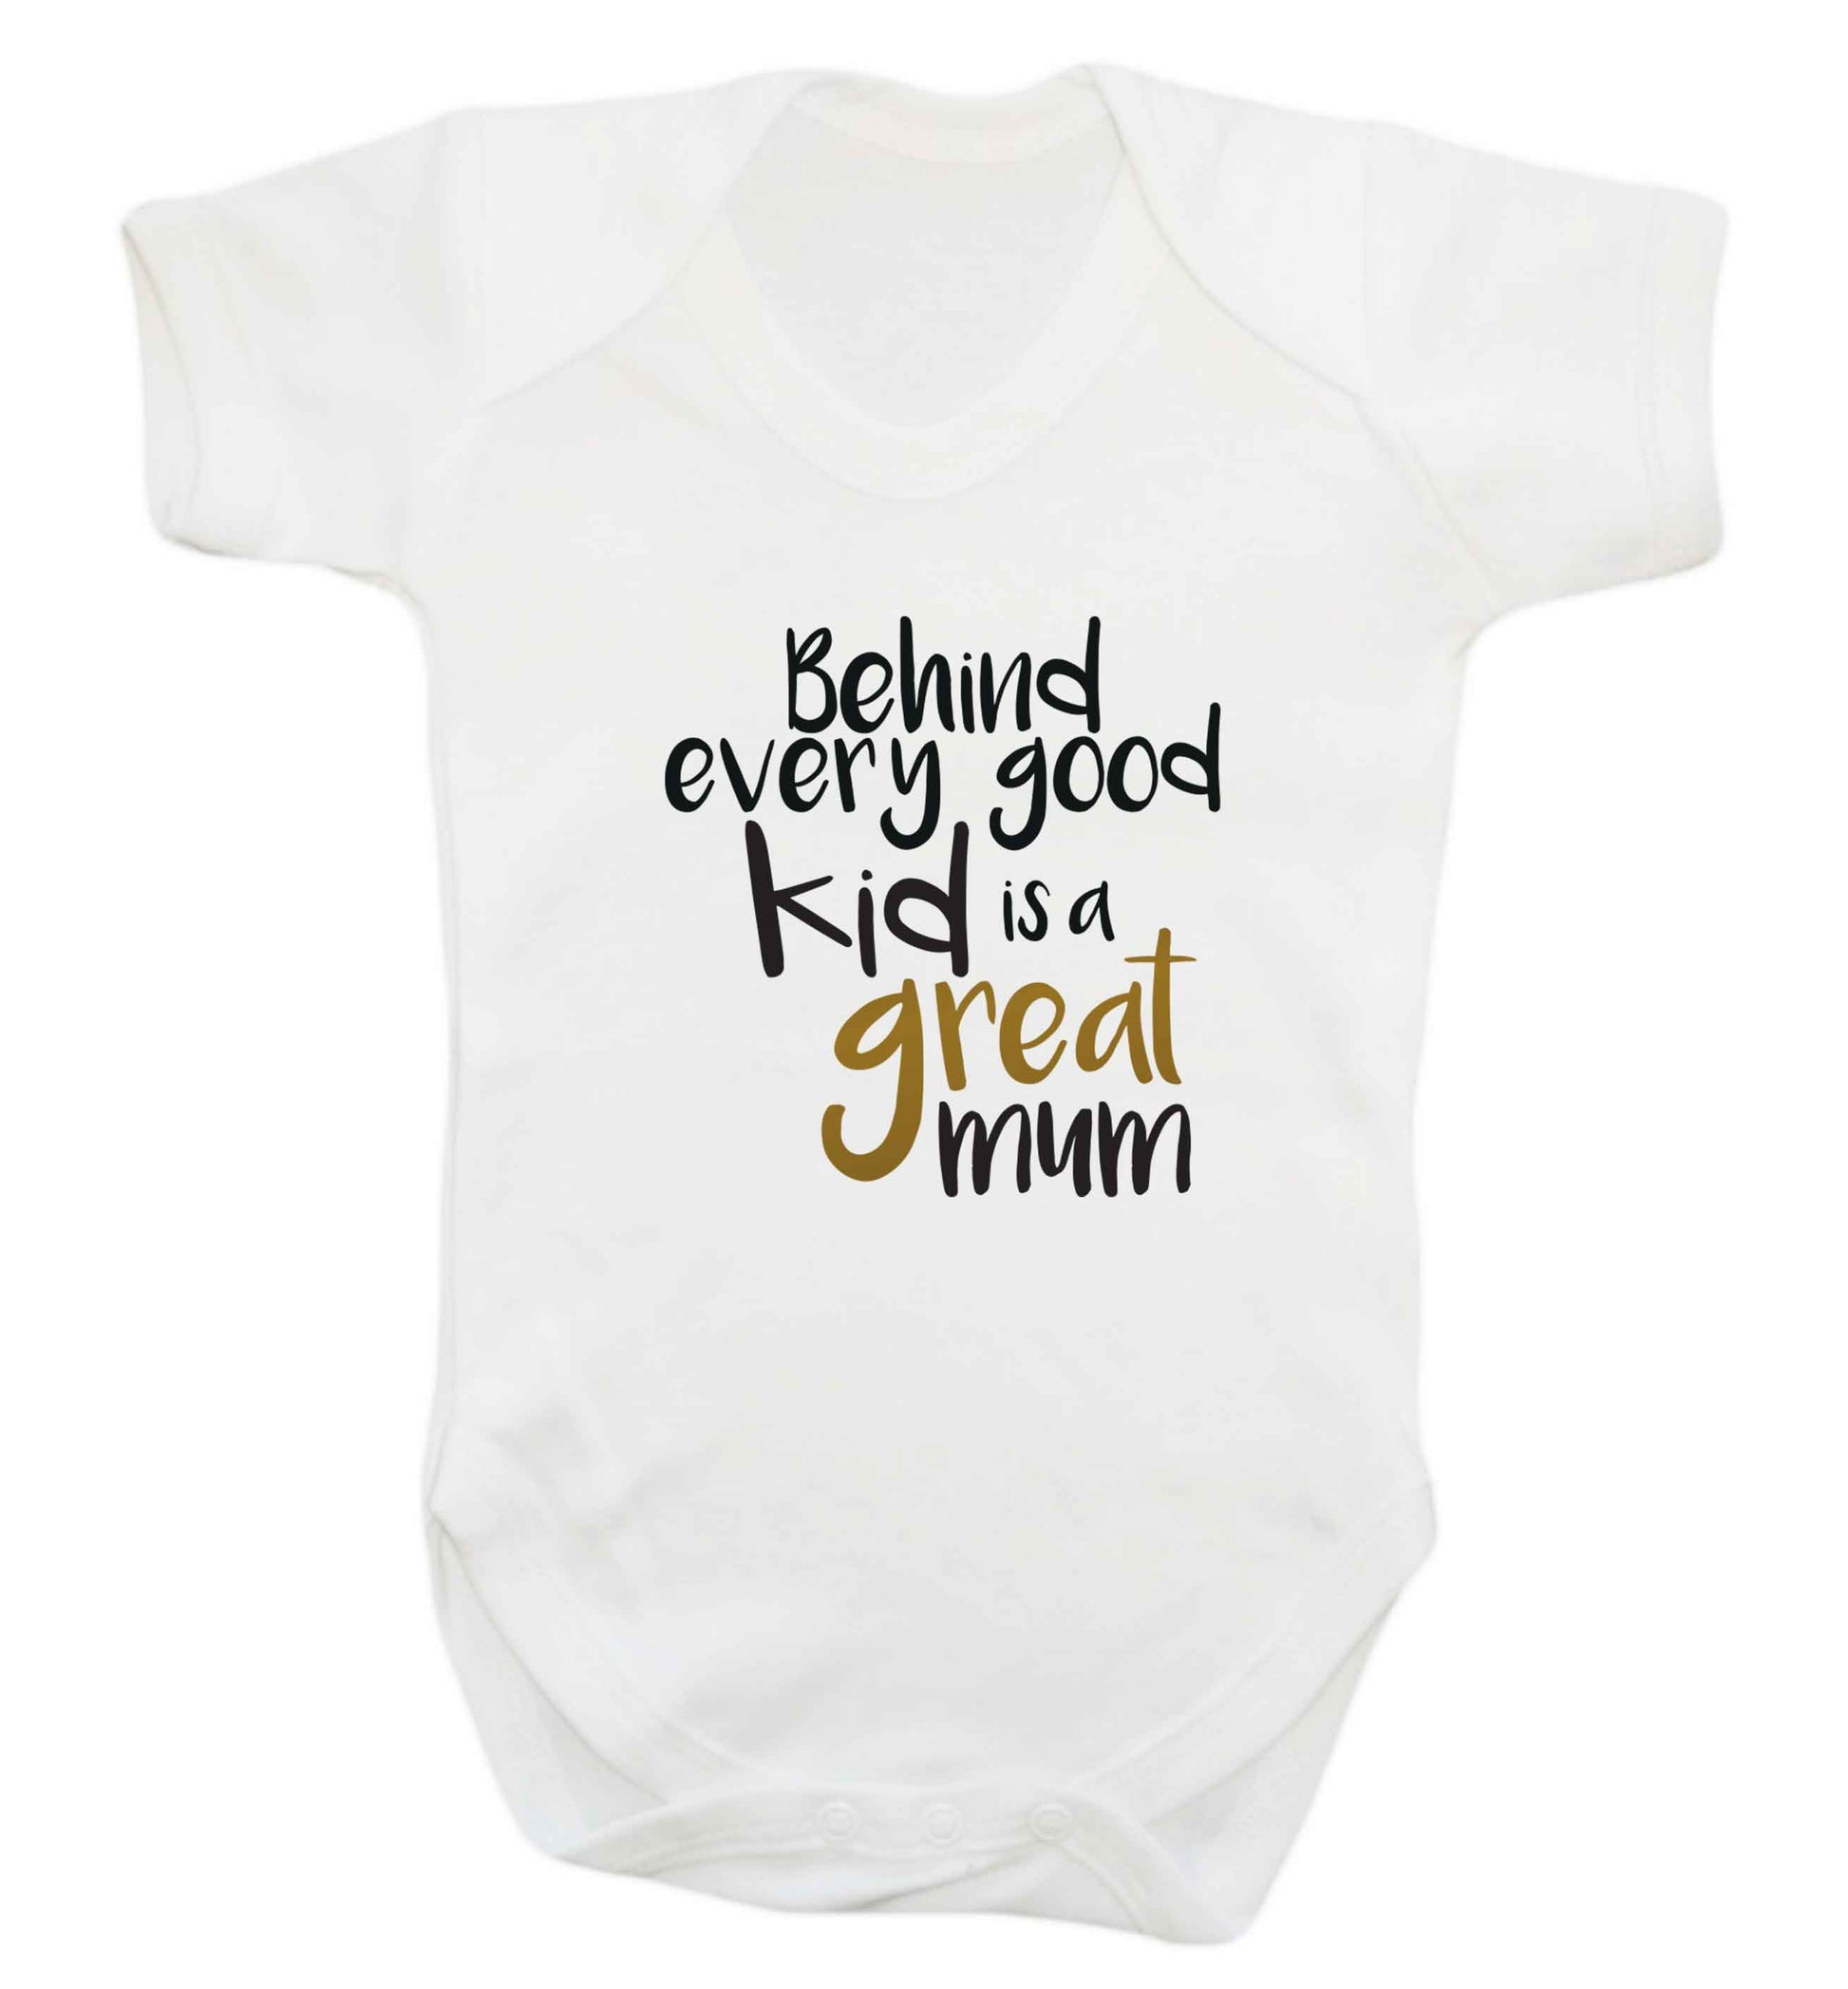 Behind every good kid is a great mum baby vest white 18-24 months